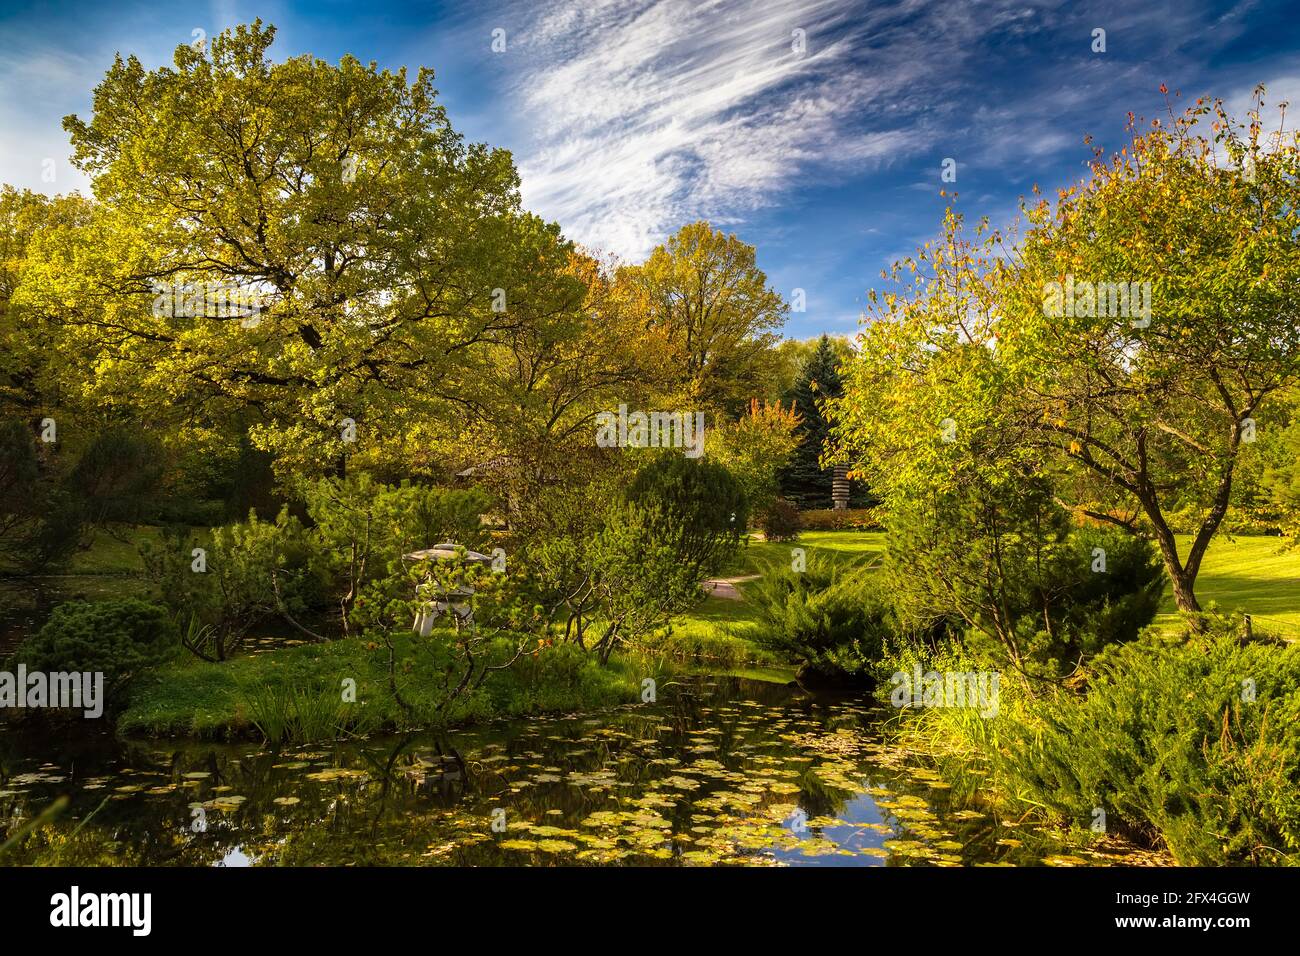 autumn landscape with a pond in the foreground Stock Photo